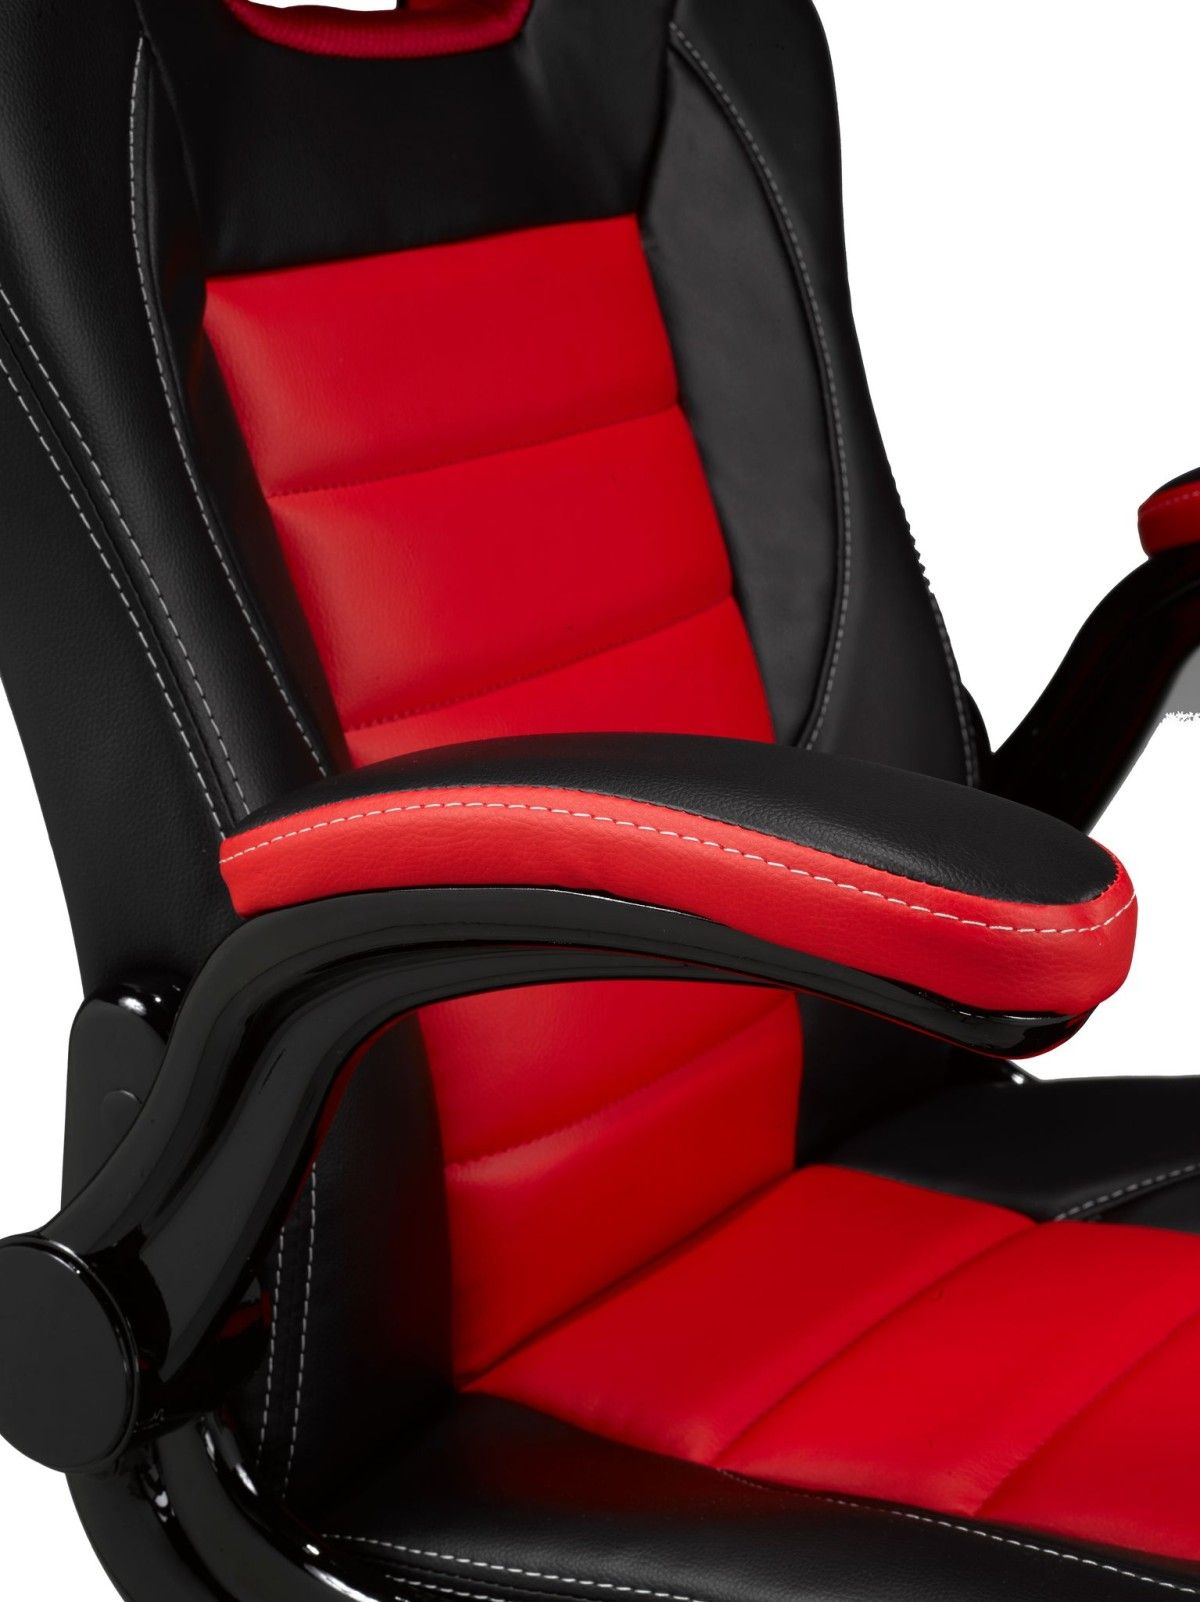 Brennan Gaming Chair - Red and Black